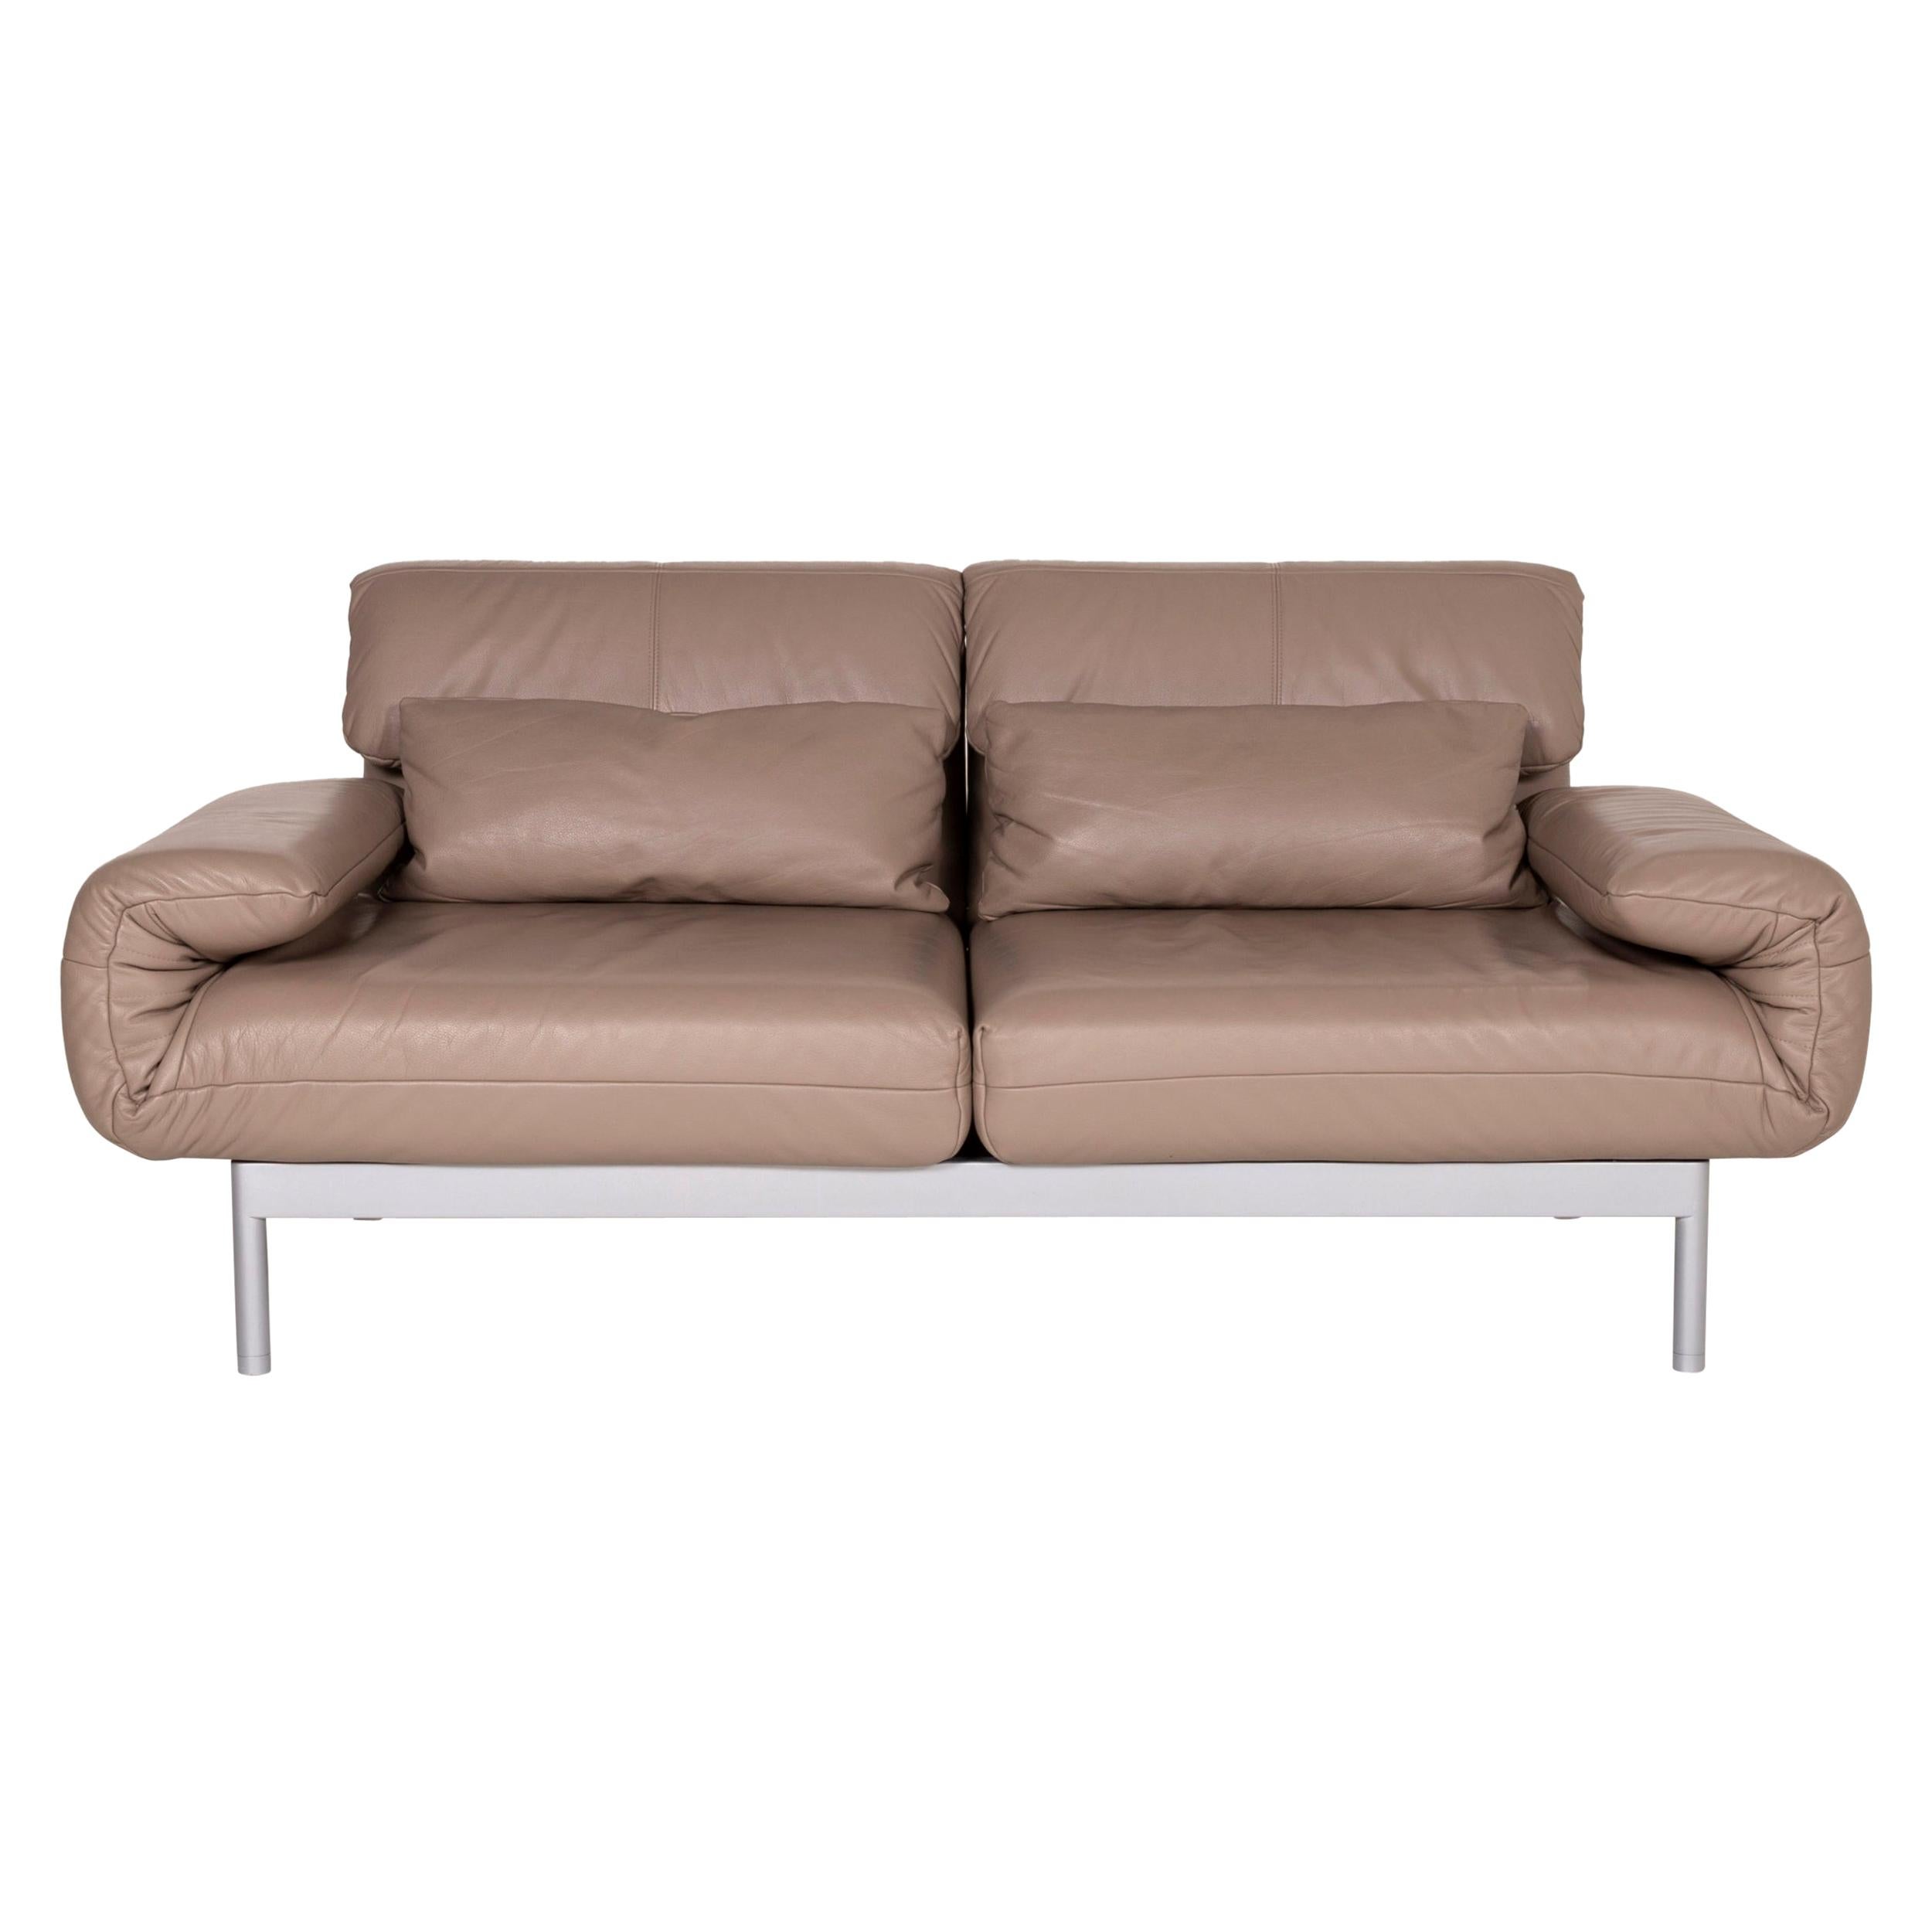 Rolf Benz Plura Leather Sofa Brown Two-Seater Function Reclining Function